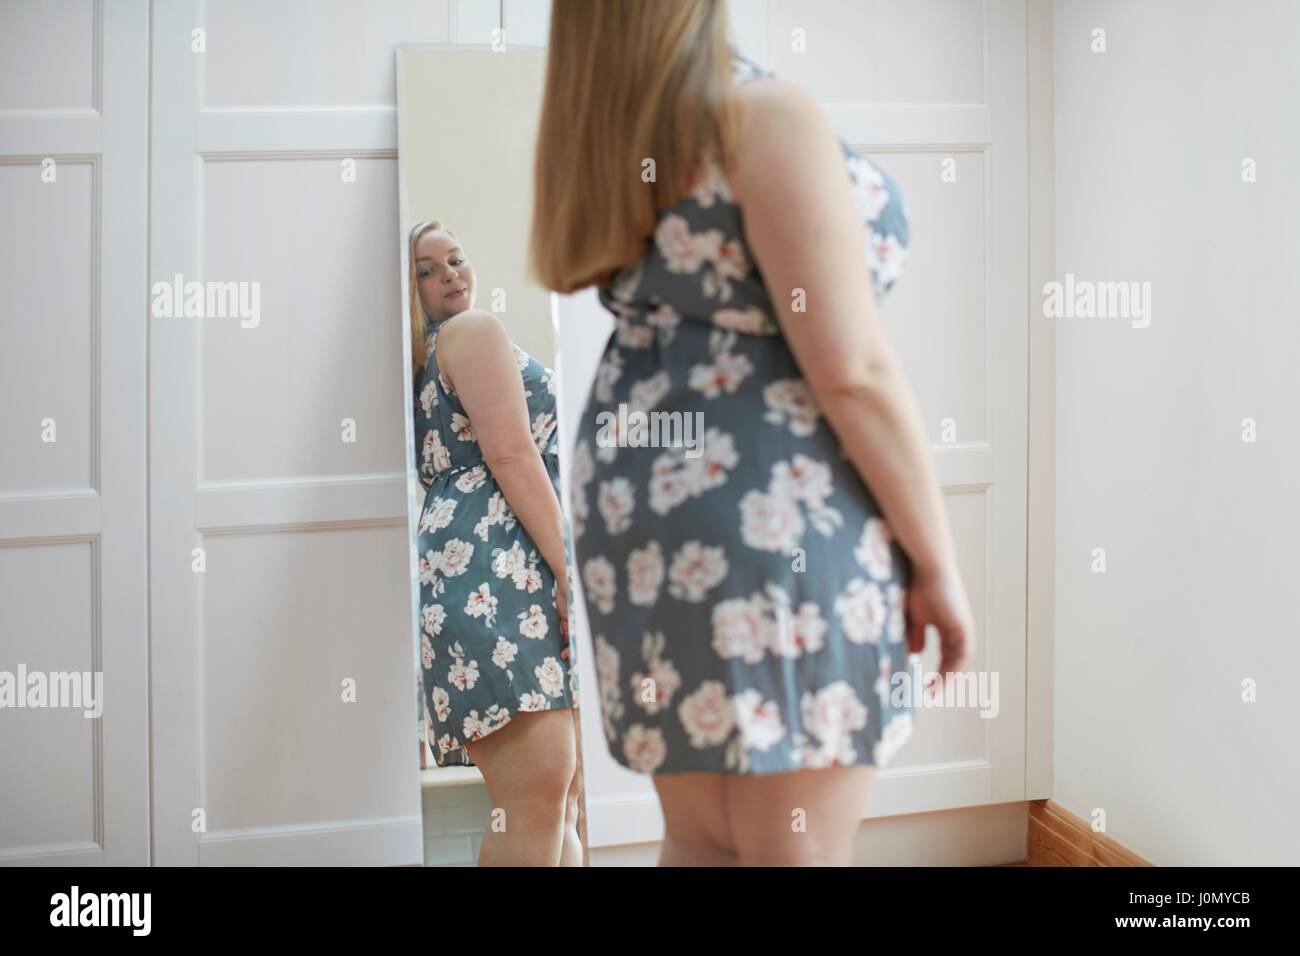 Young woman looking at reflection in mirror. Stock Photo